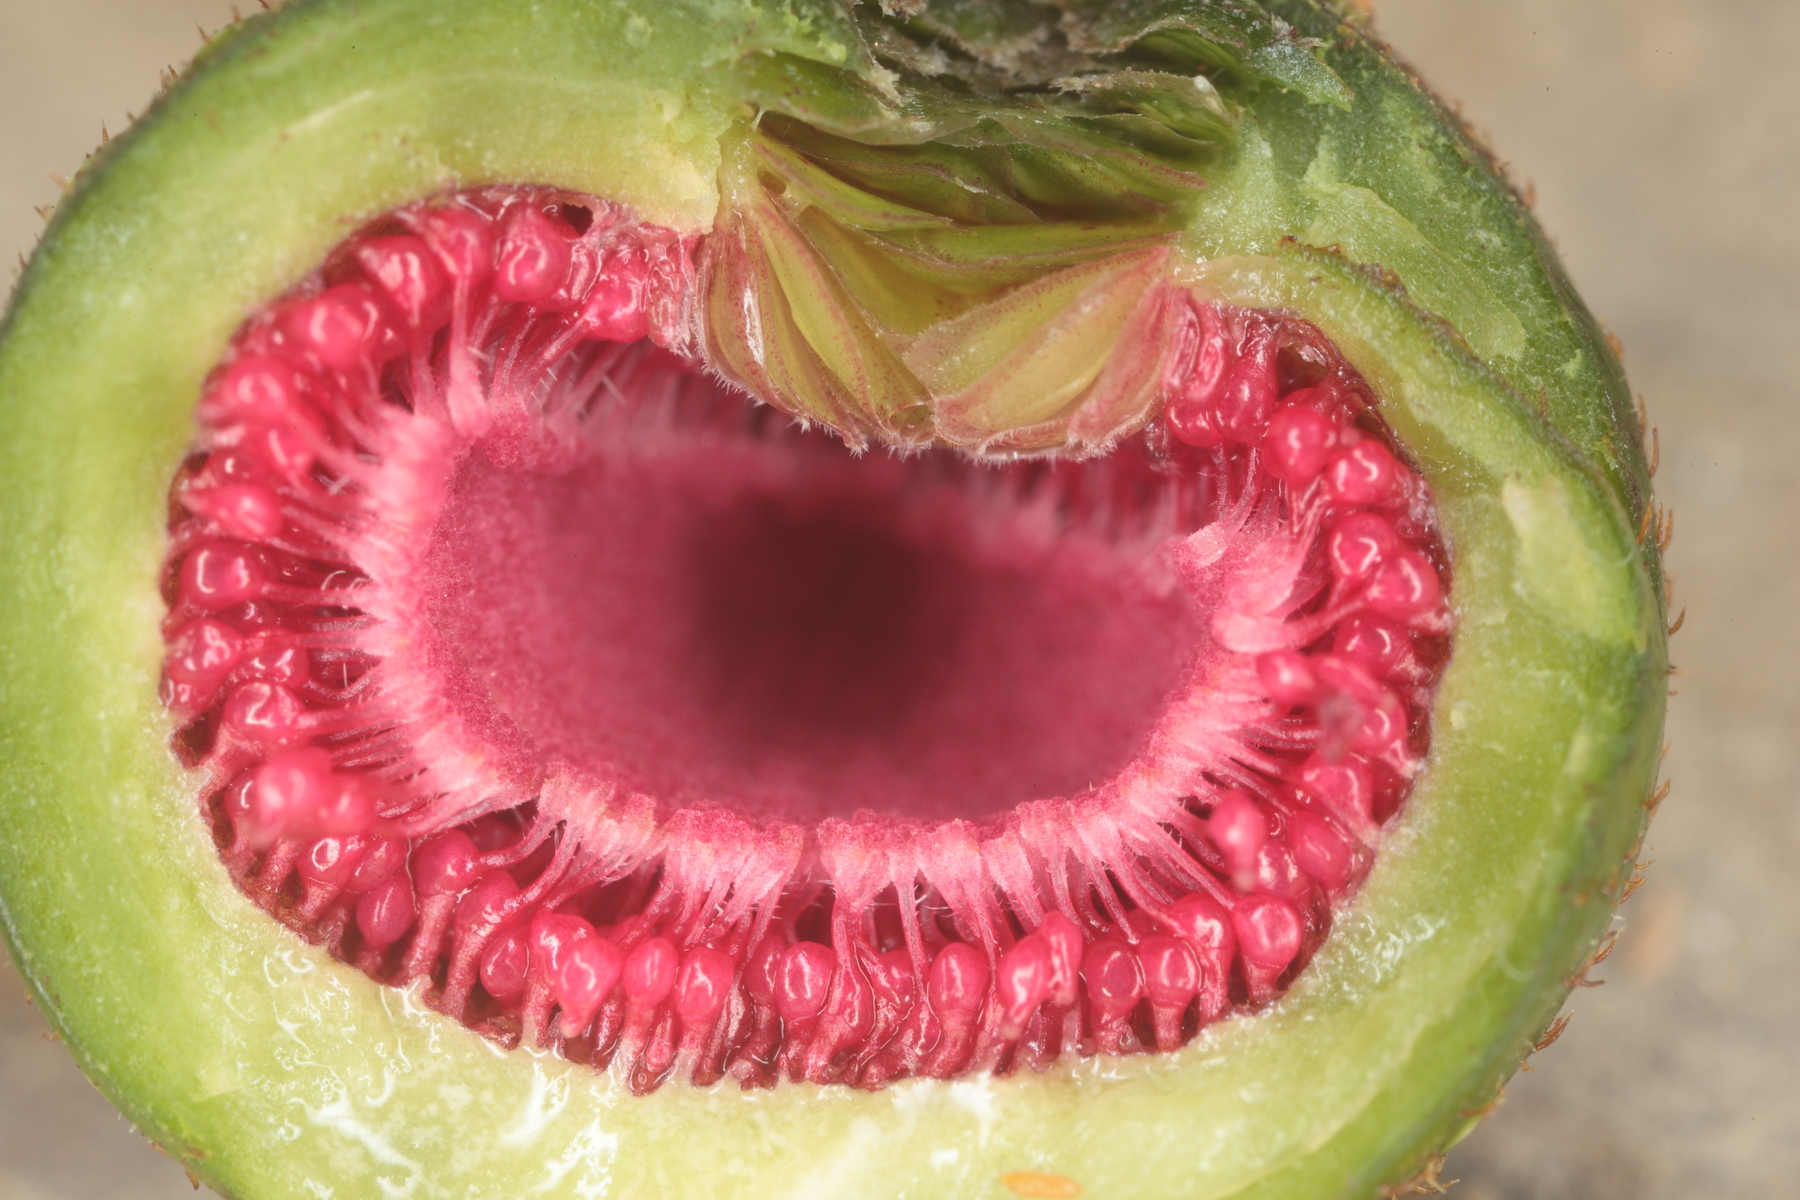 Section of a fruit of a Ficus benguetensis. The calyx of a fig can contain over 2,000 flowers.